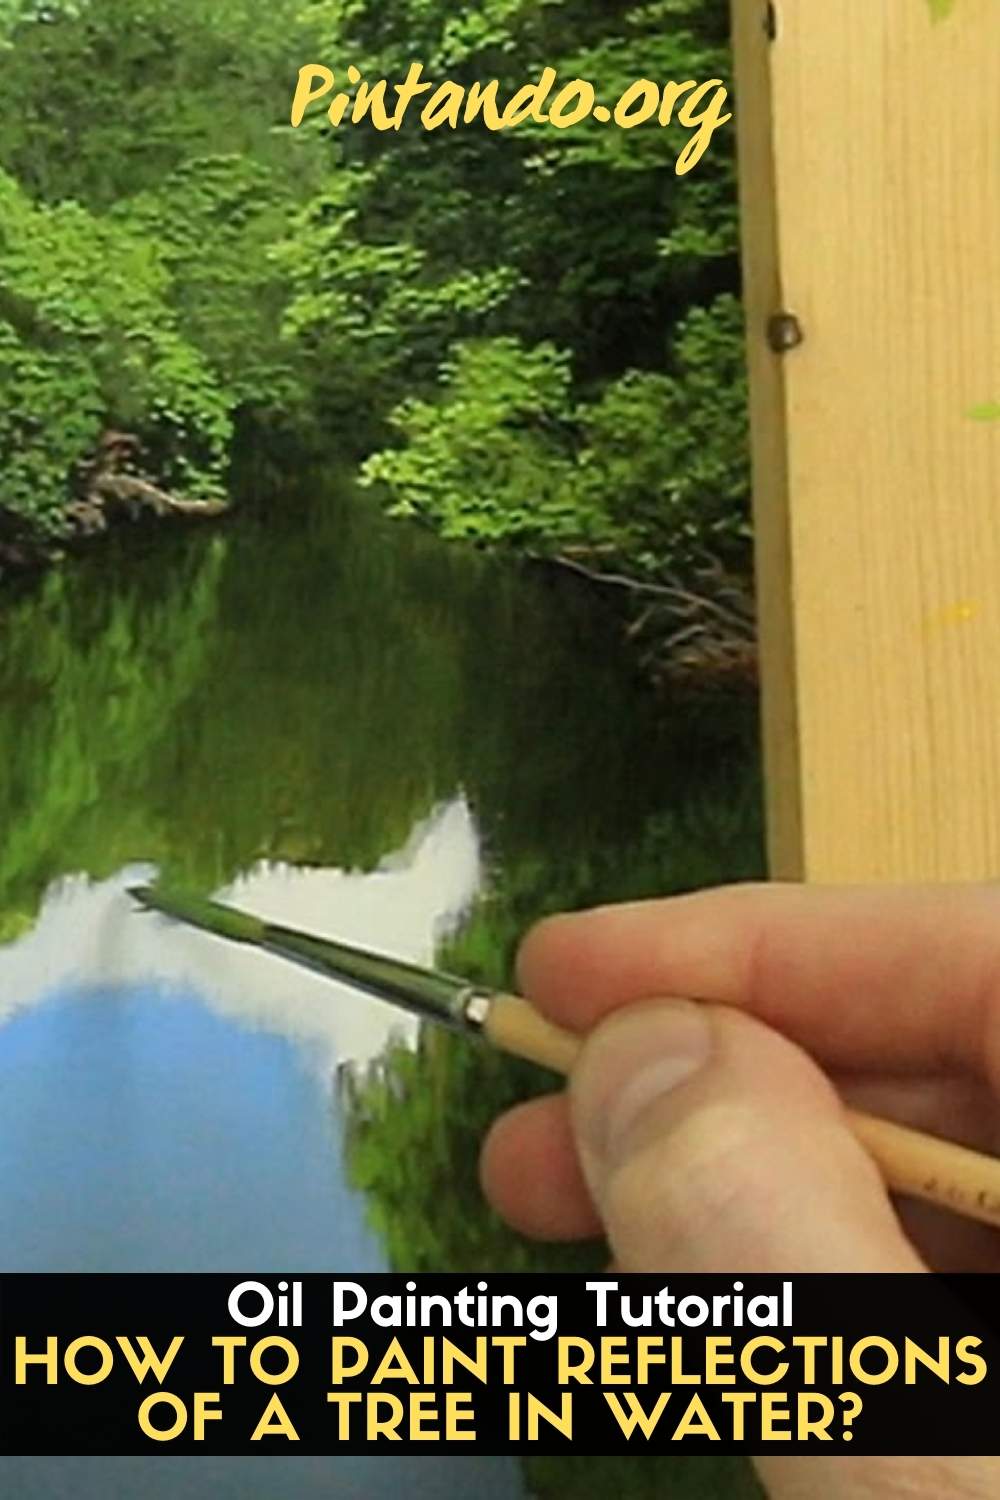 How to paint reflections of a tree in water Oil Painting Tutorial (3)